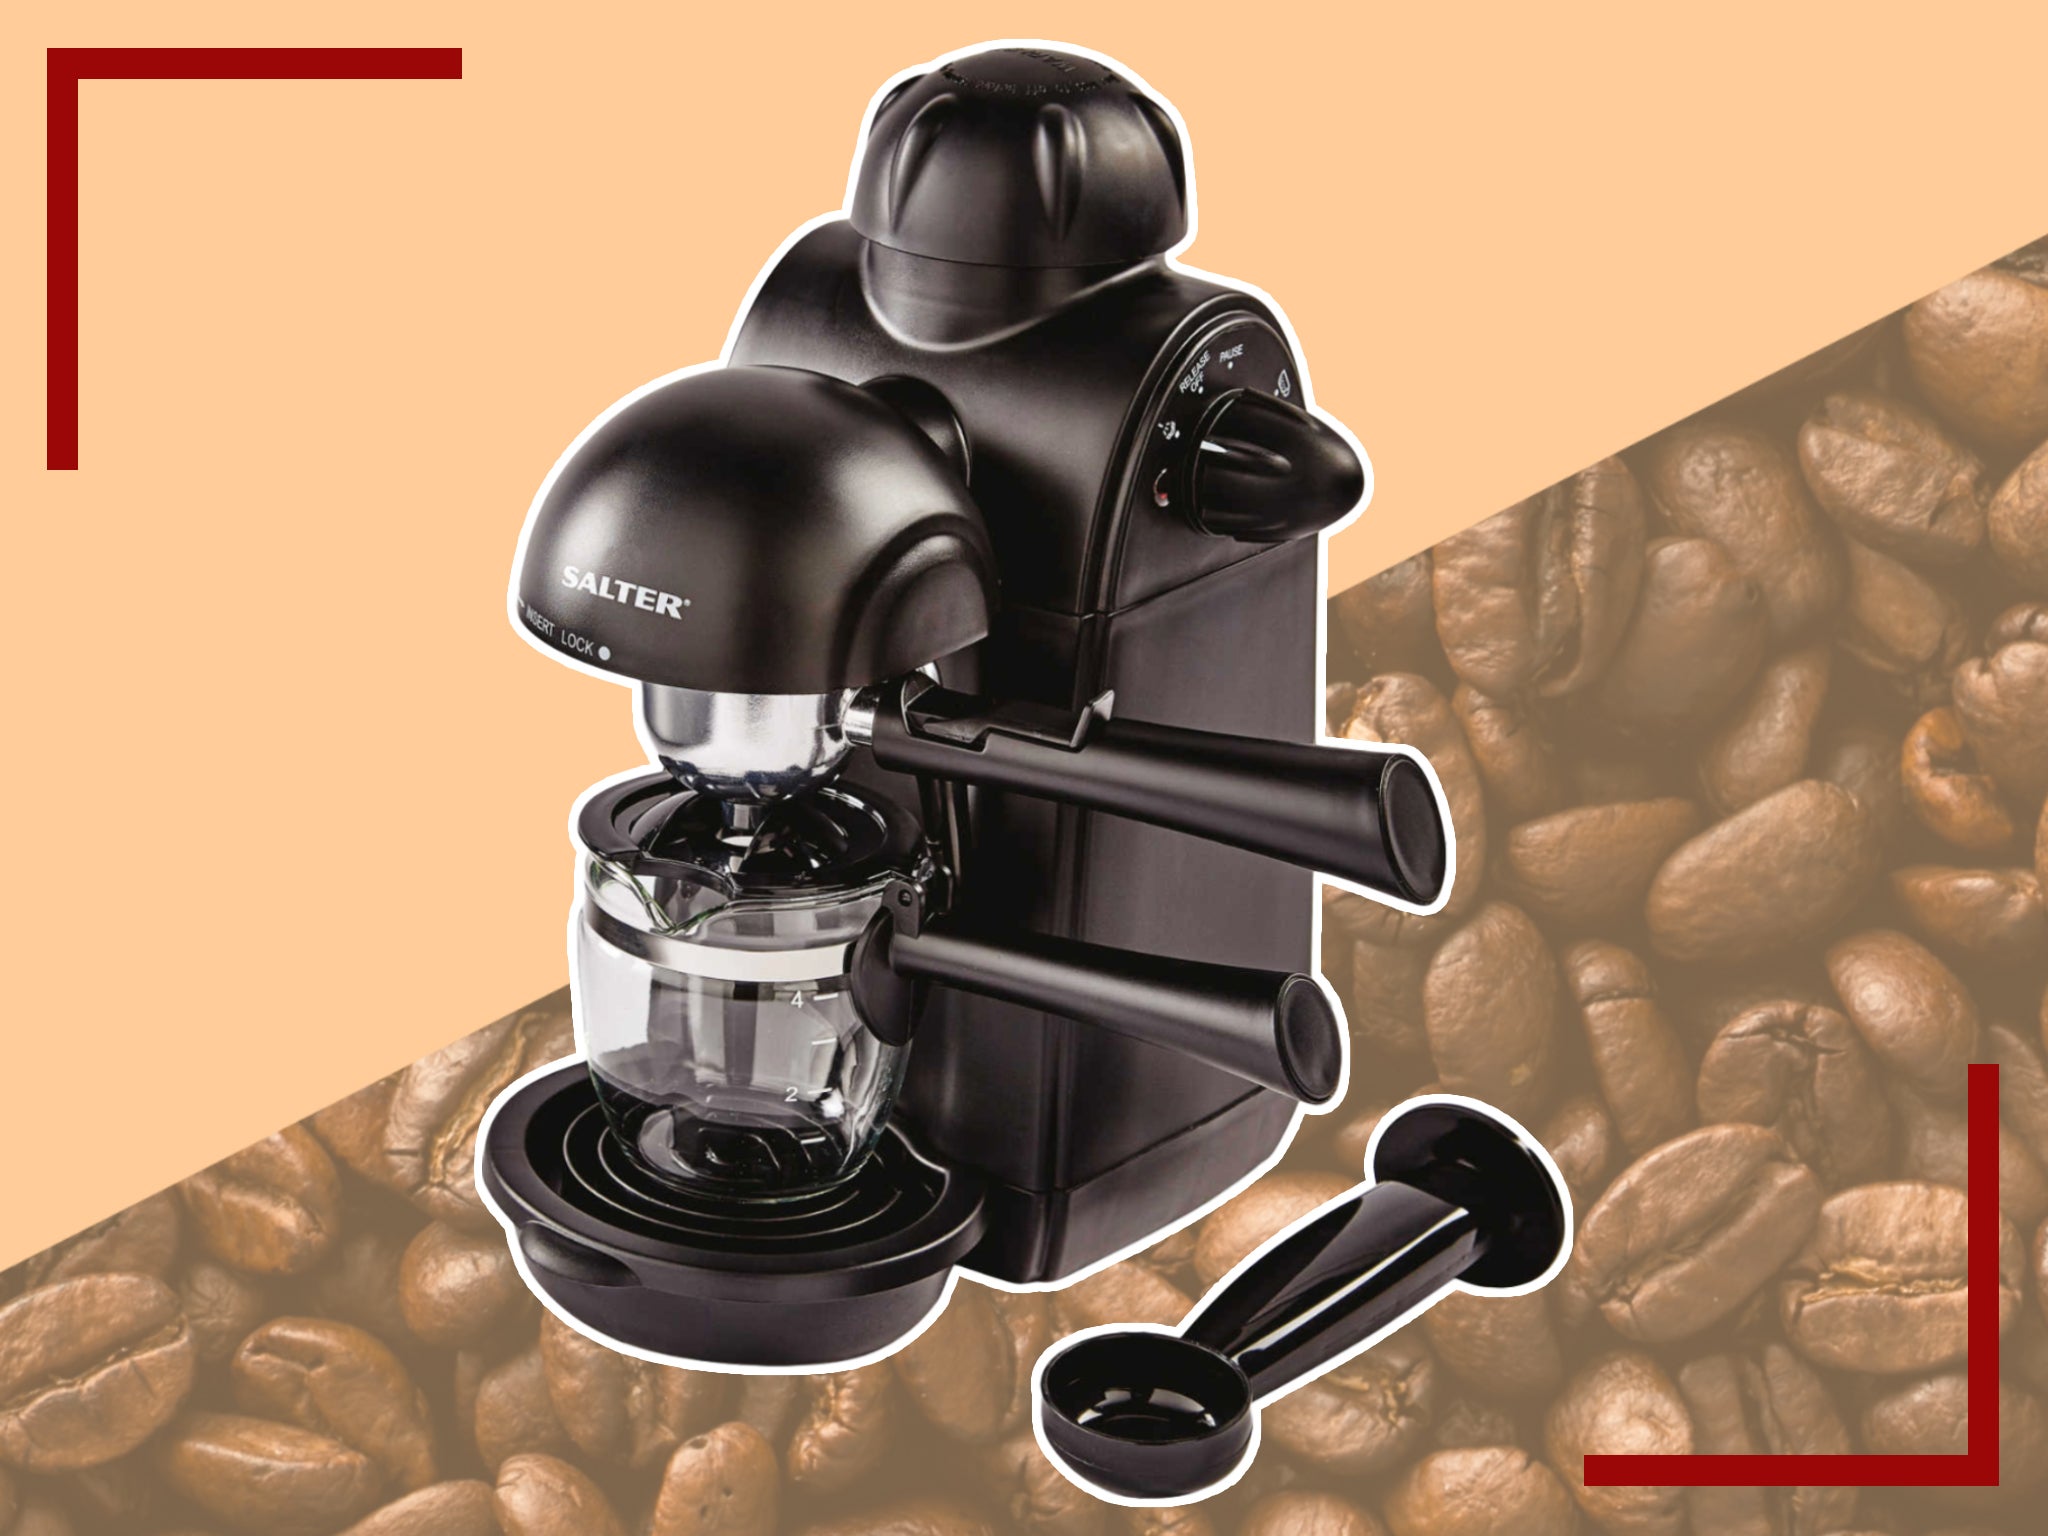 Salter Coffee Maker To Go 